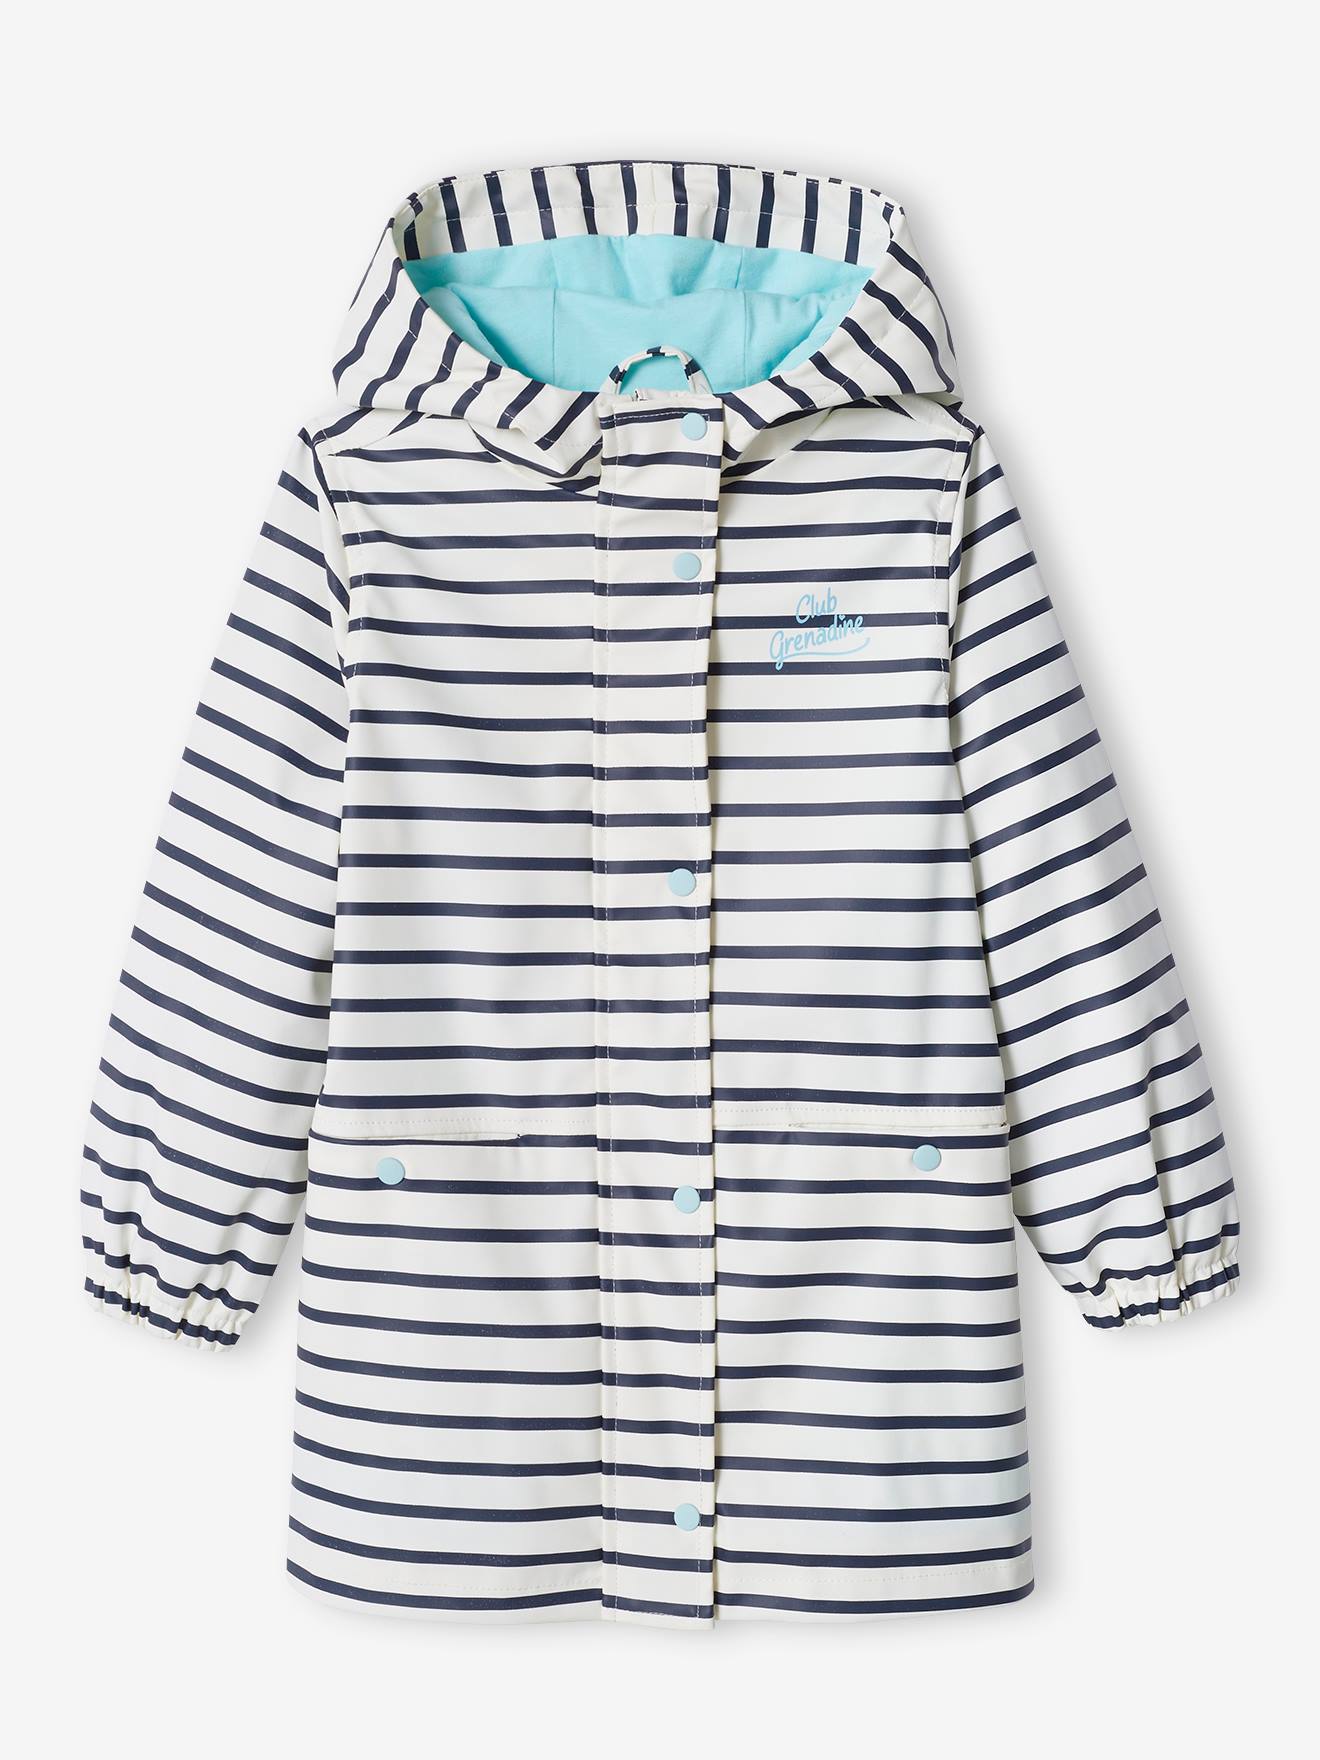 Floral Raincoat with Hood, for Girls striped navy blue